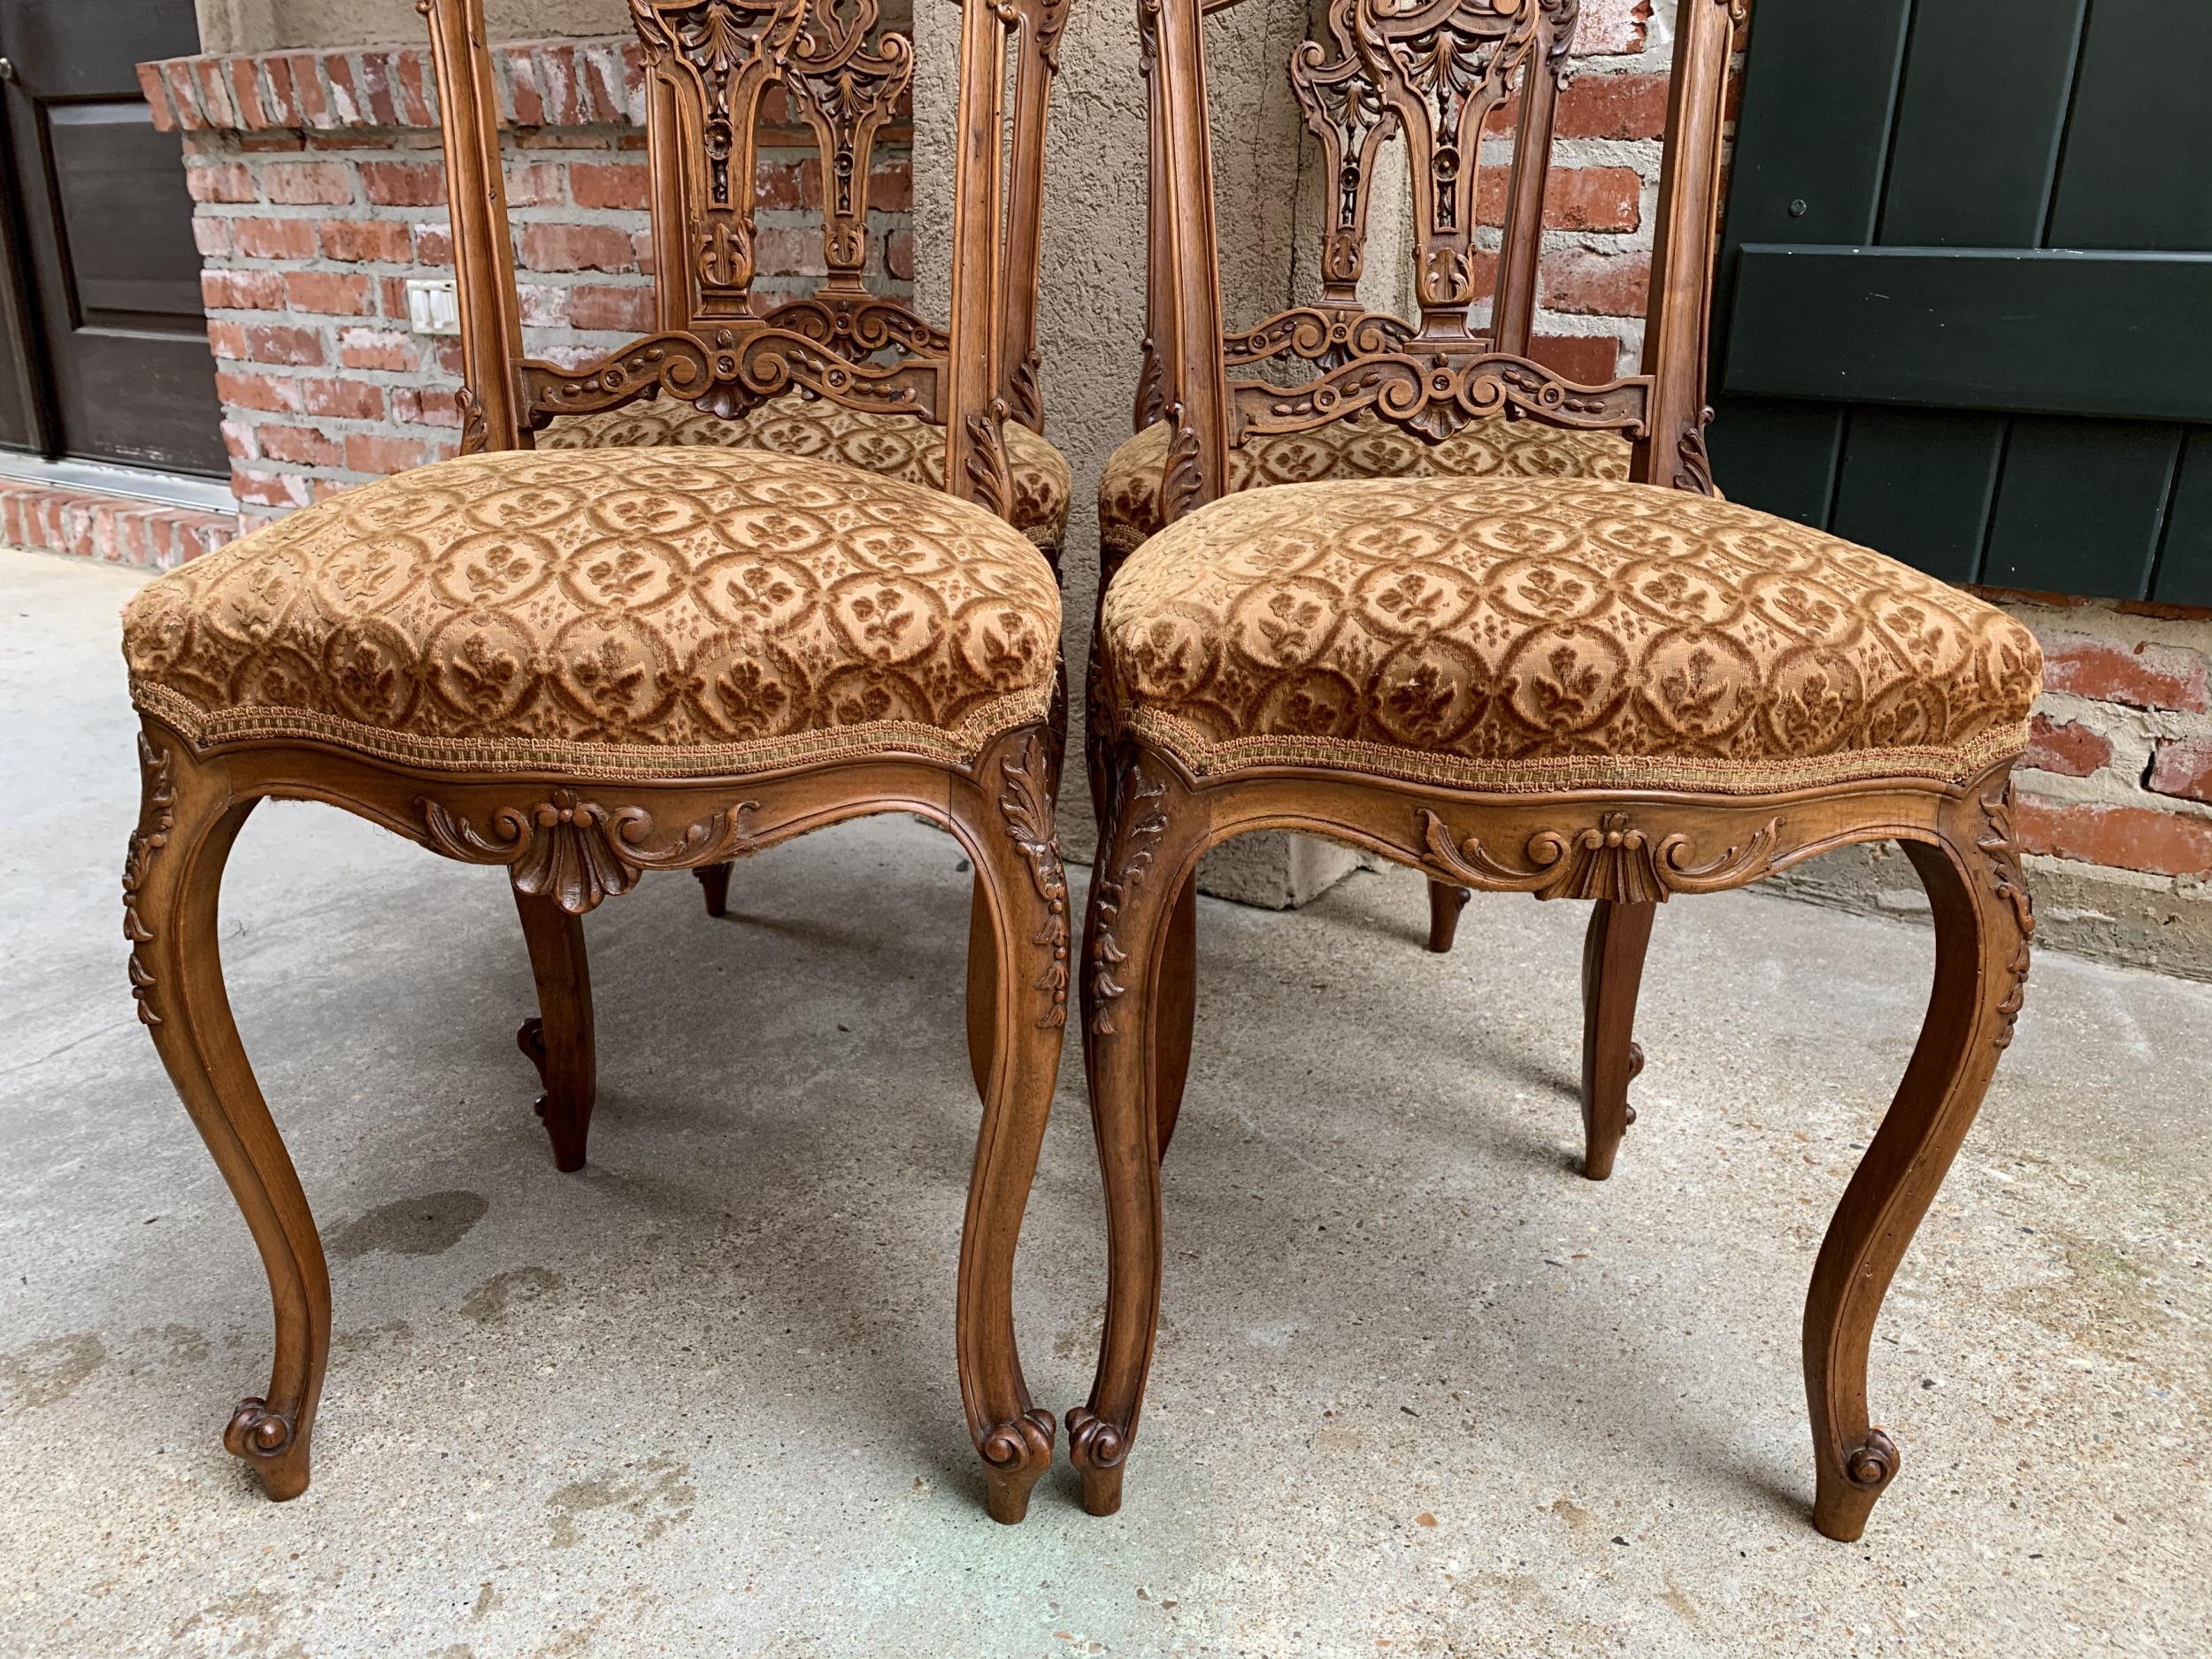 Upholstery 19th century SET of 4 French Petite Chair Carved Walnut Louis XV Tea or Vanity